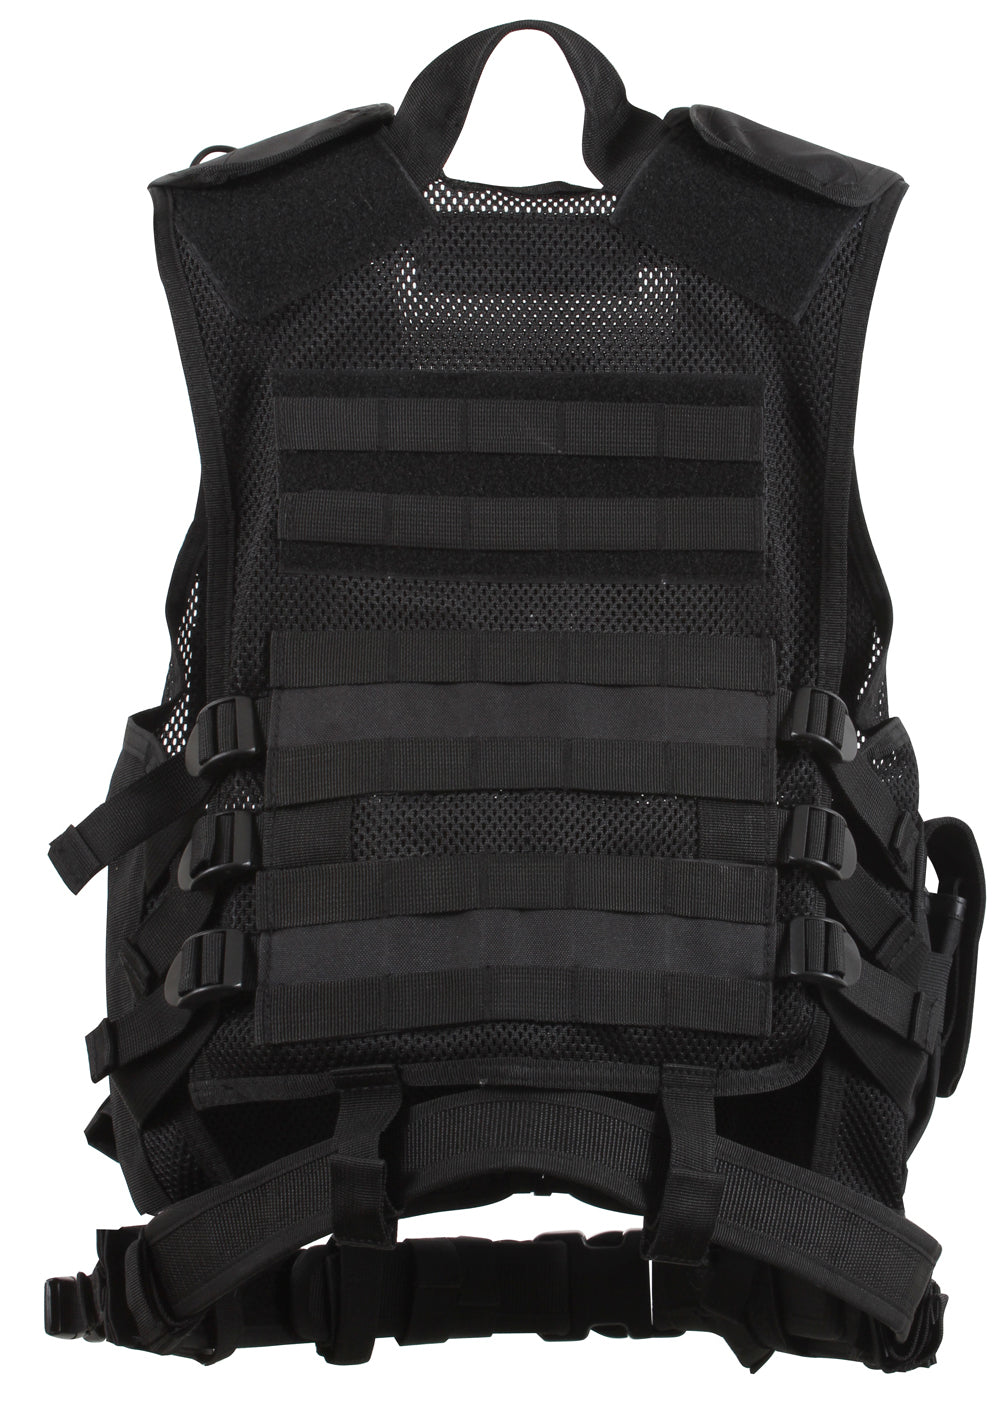 Rothco Cross Draw MOLLE Tactical Vest - Black